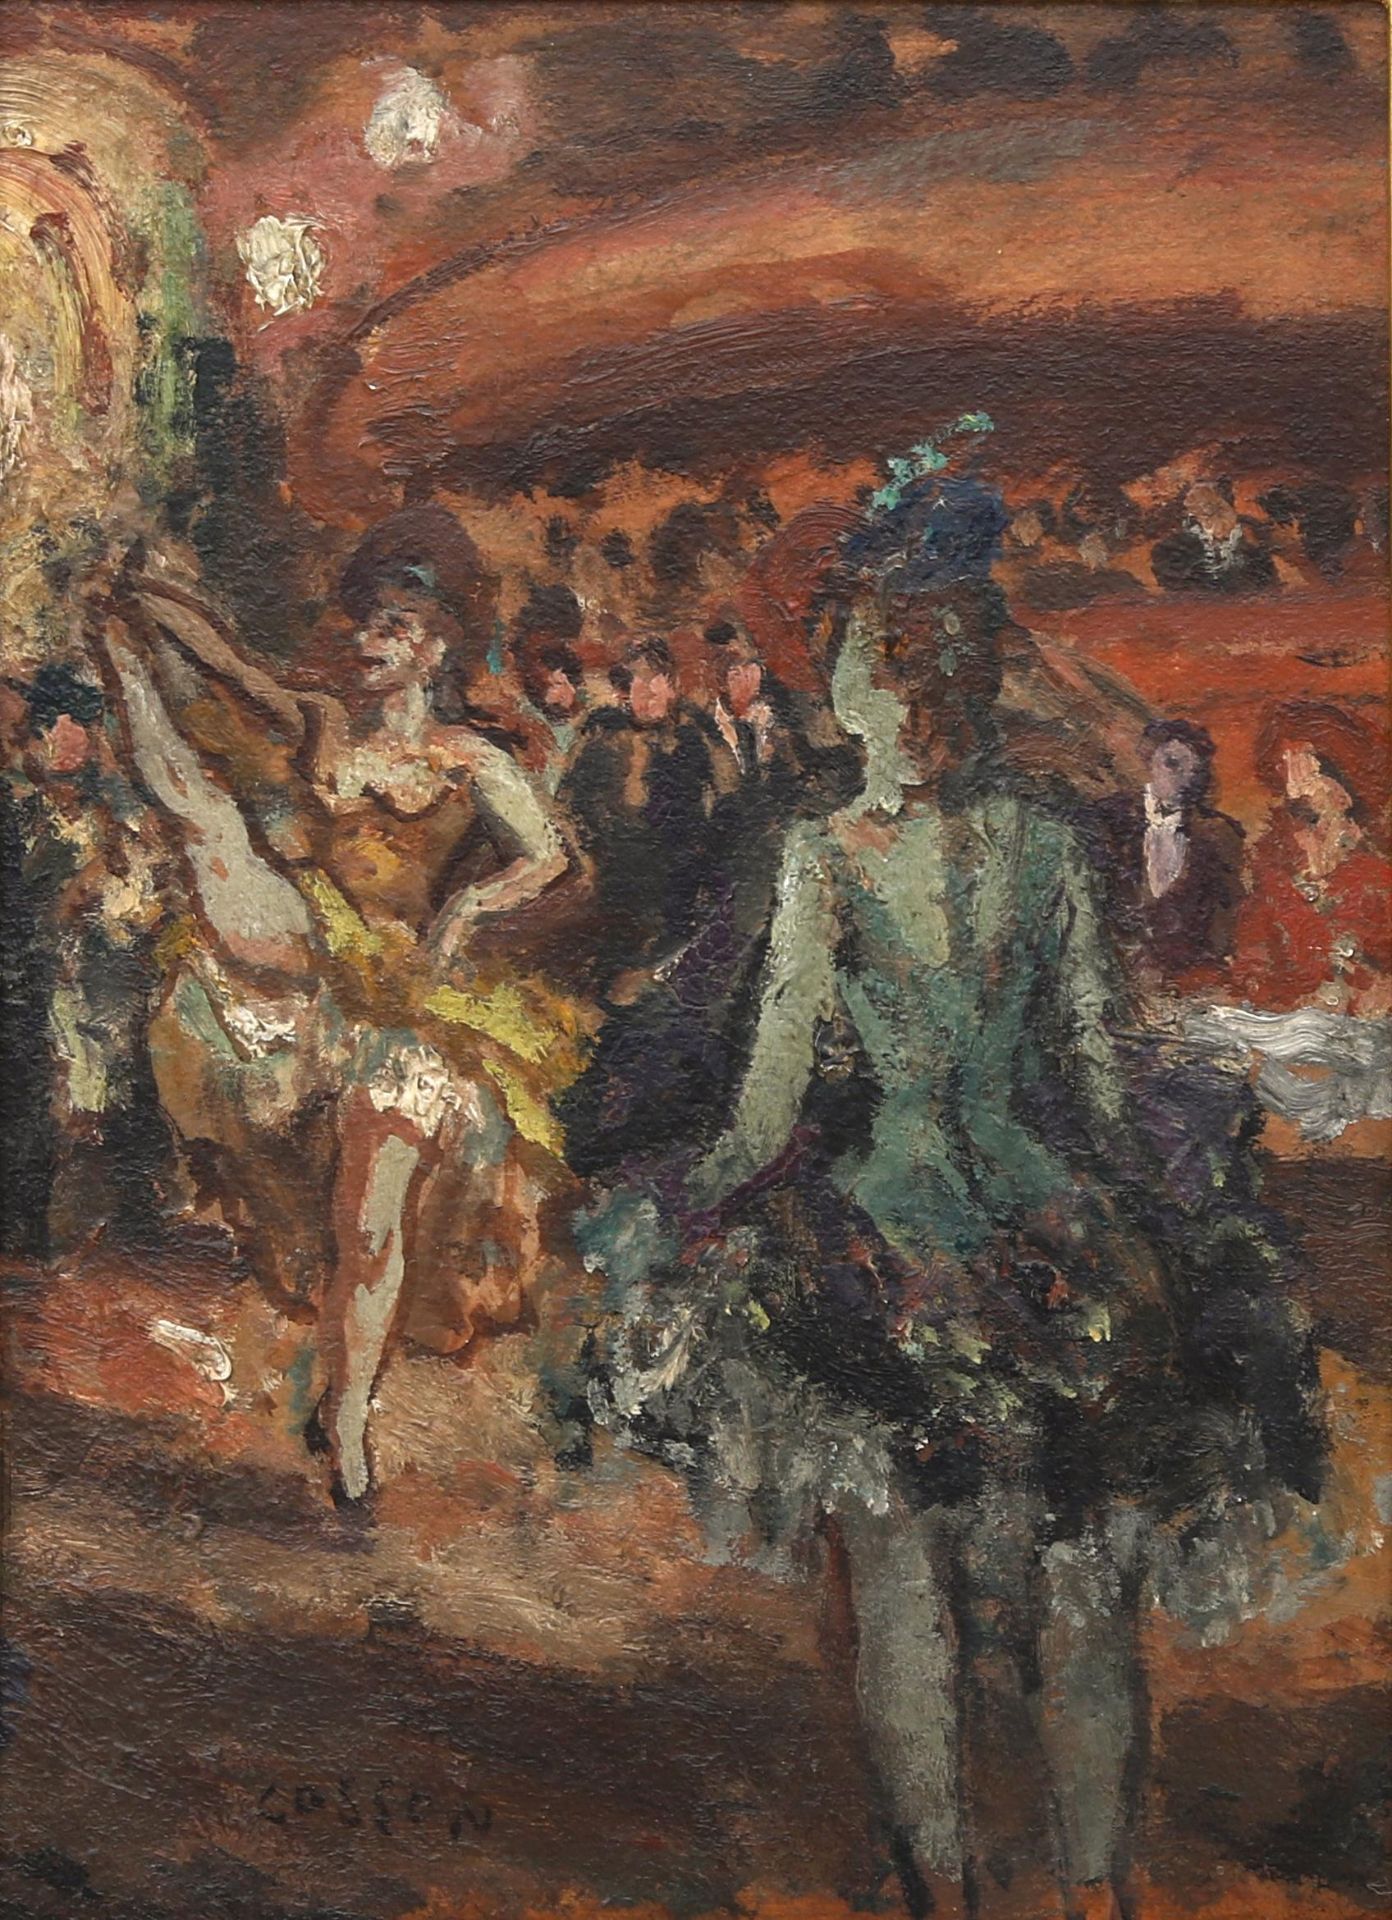 Marcel Cosson (1878-1956) 'Cancan dancers', signed 'Cosson' lower left, oil on panel. Olieverf op